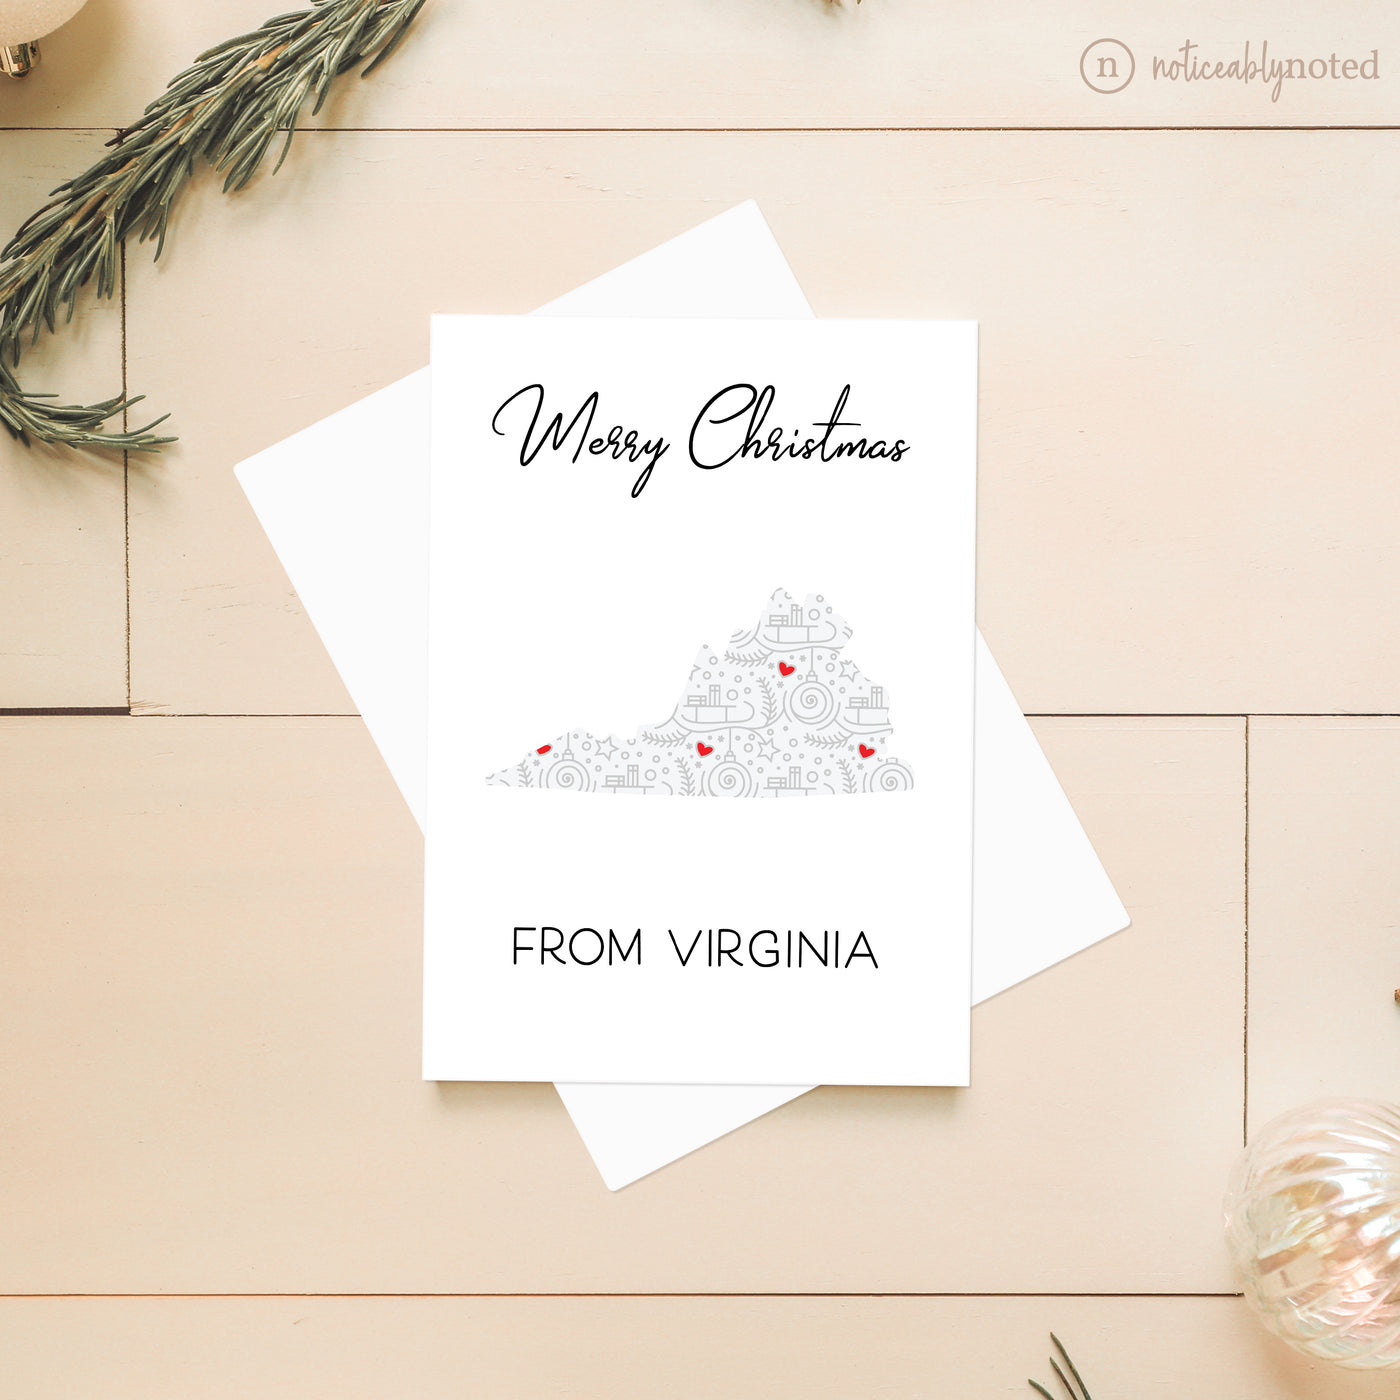 Virginia Christmas Card - Merry Christmas | Noticeably Noted